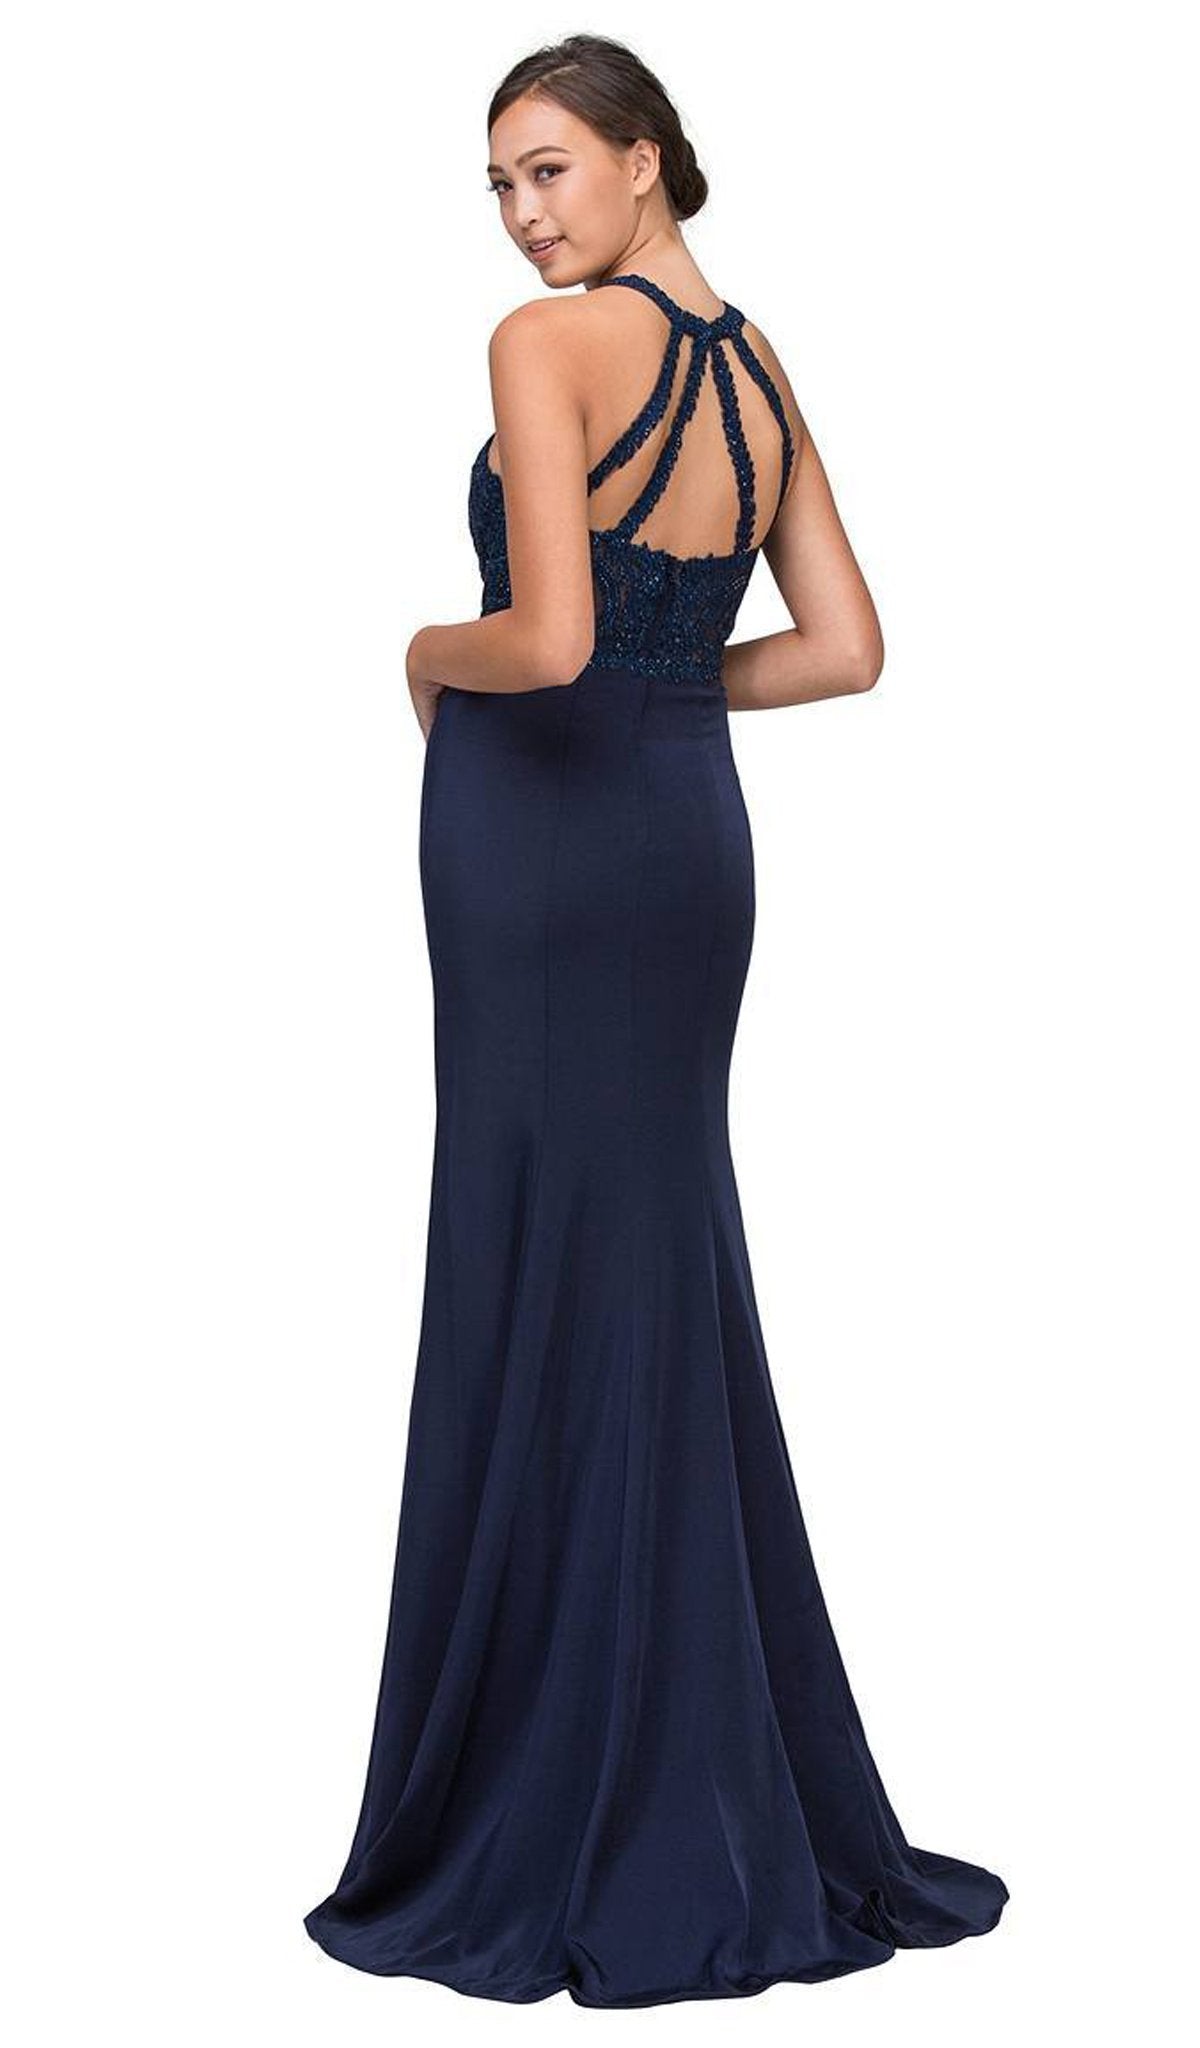 Eureka Fashion - Applique Halter Stretch Satin Trumpet Dress 7133 - 1 pc Navy In Size L Available In Blue